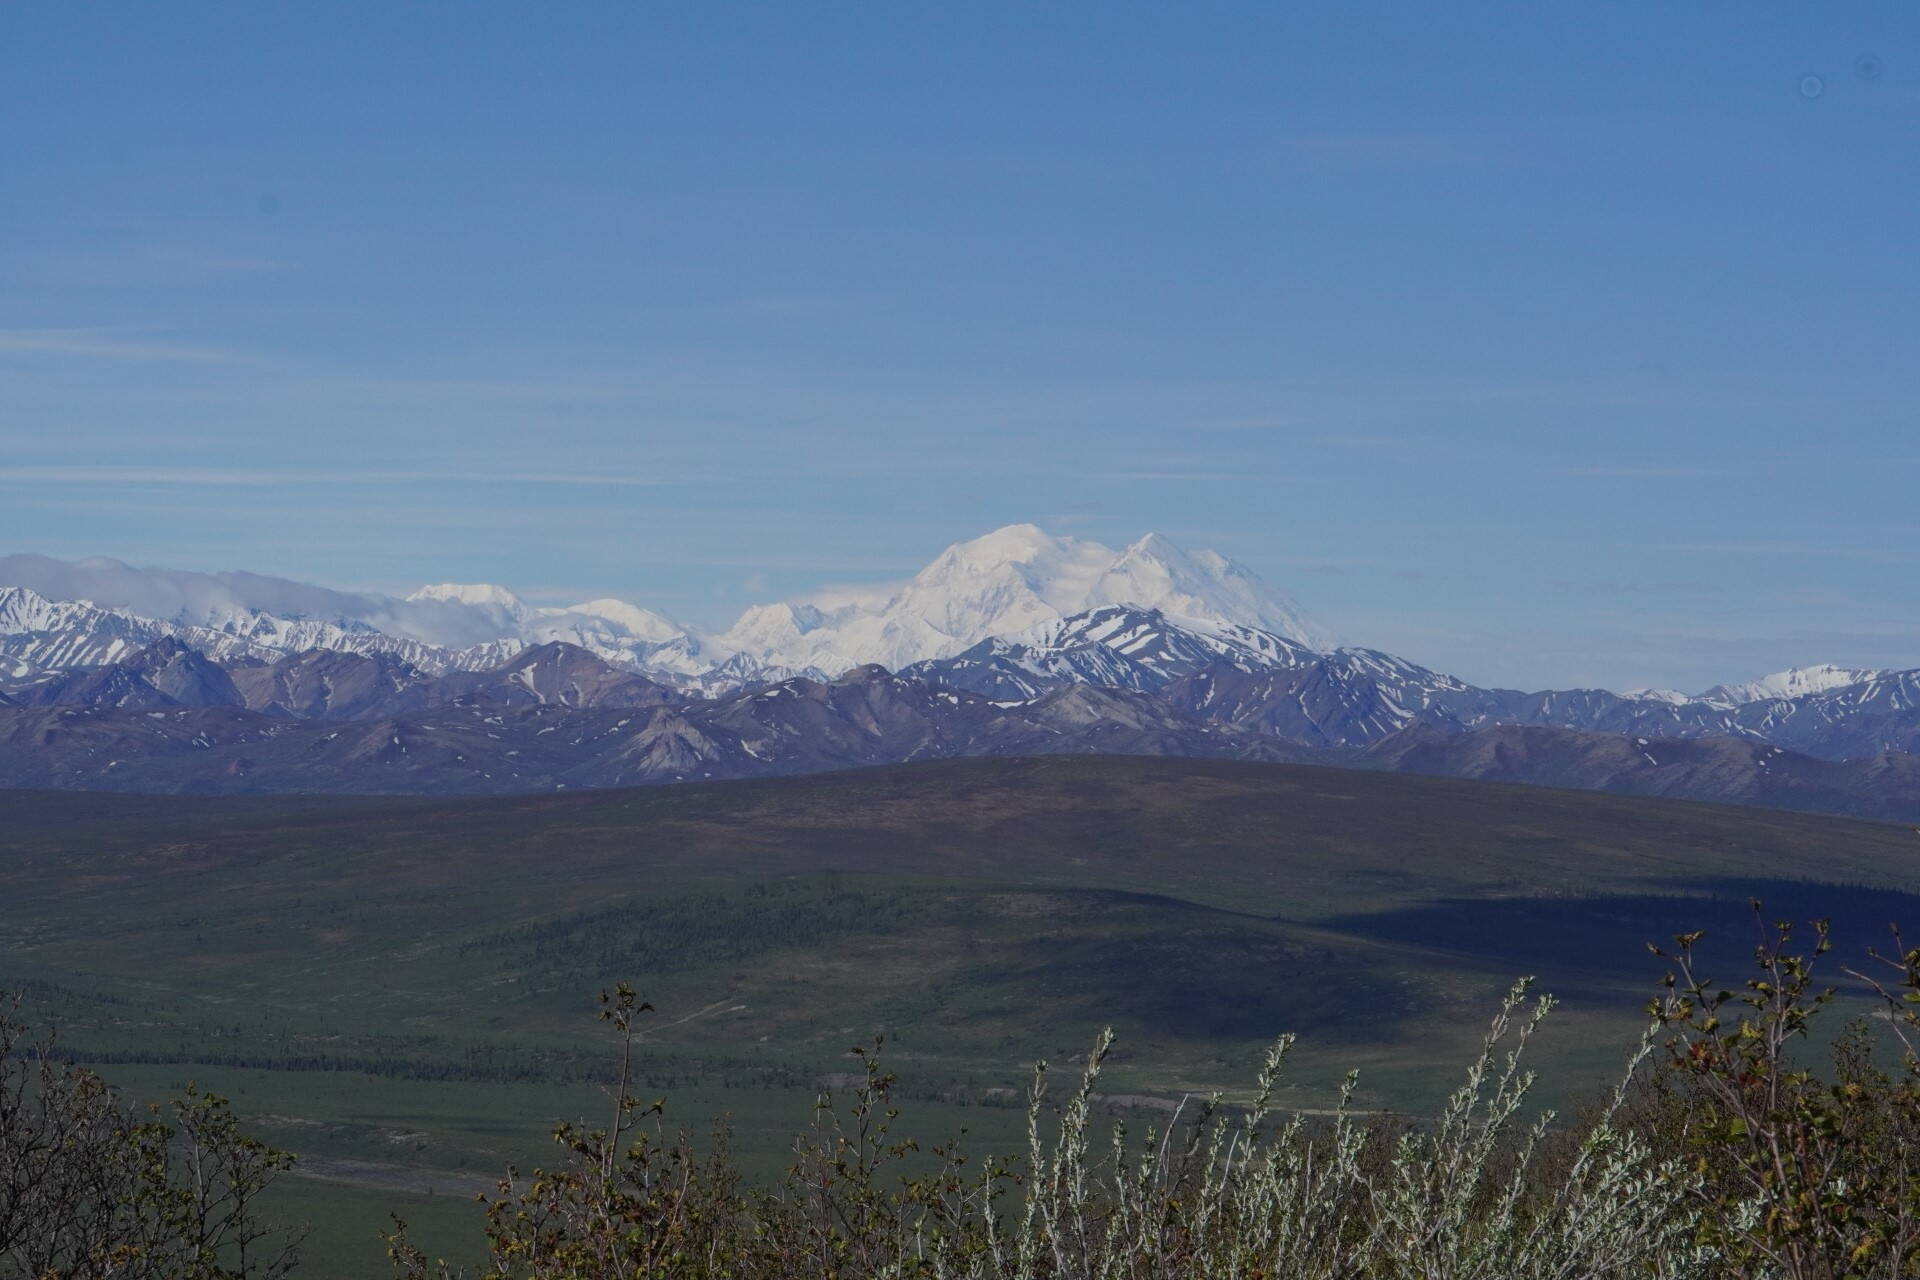 Areas like Denali National Park allow nature to be preserved which is great, so long as there are also areas that allow for the maximum benefit of Alaskans as stated in the state’s constitution. (Photo by Jeff Lund)